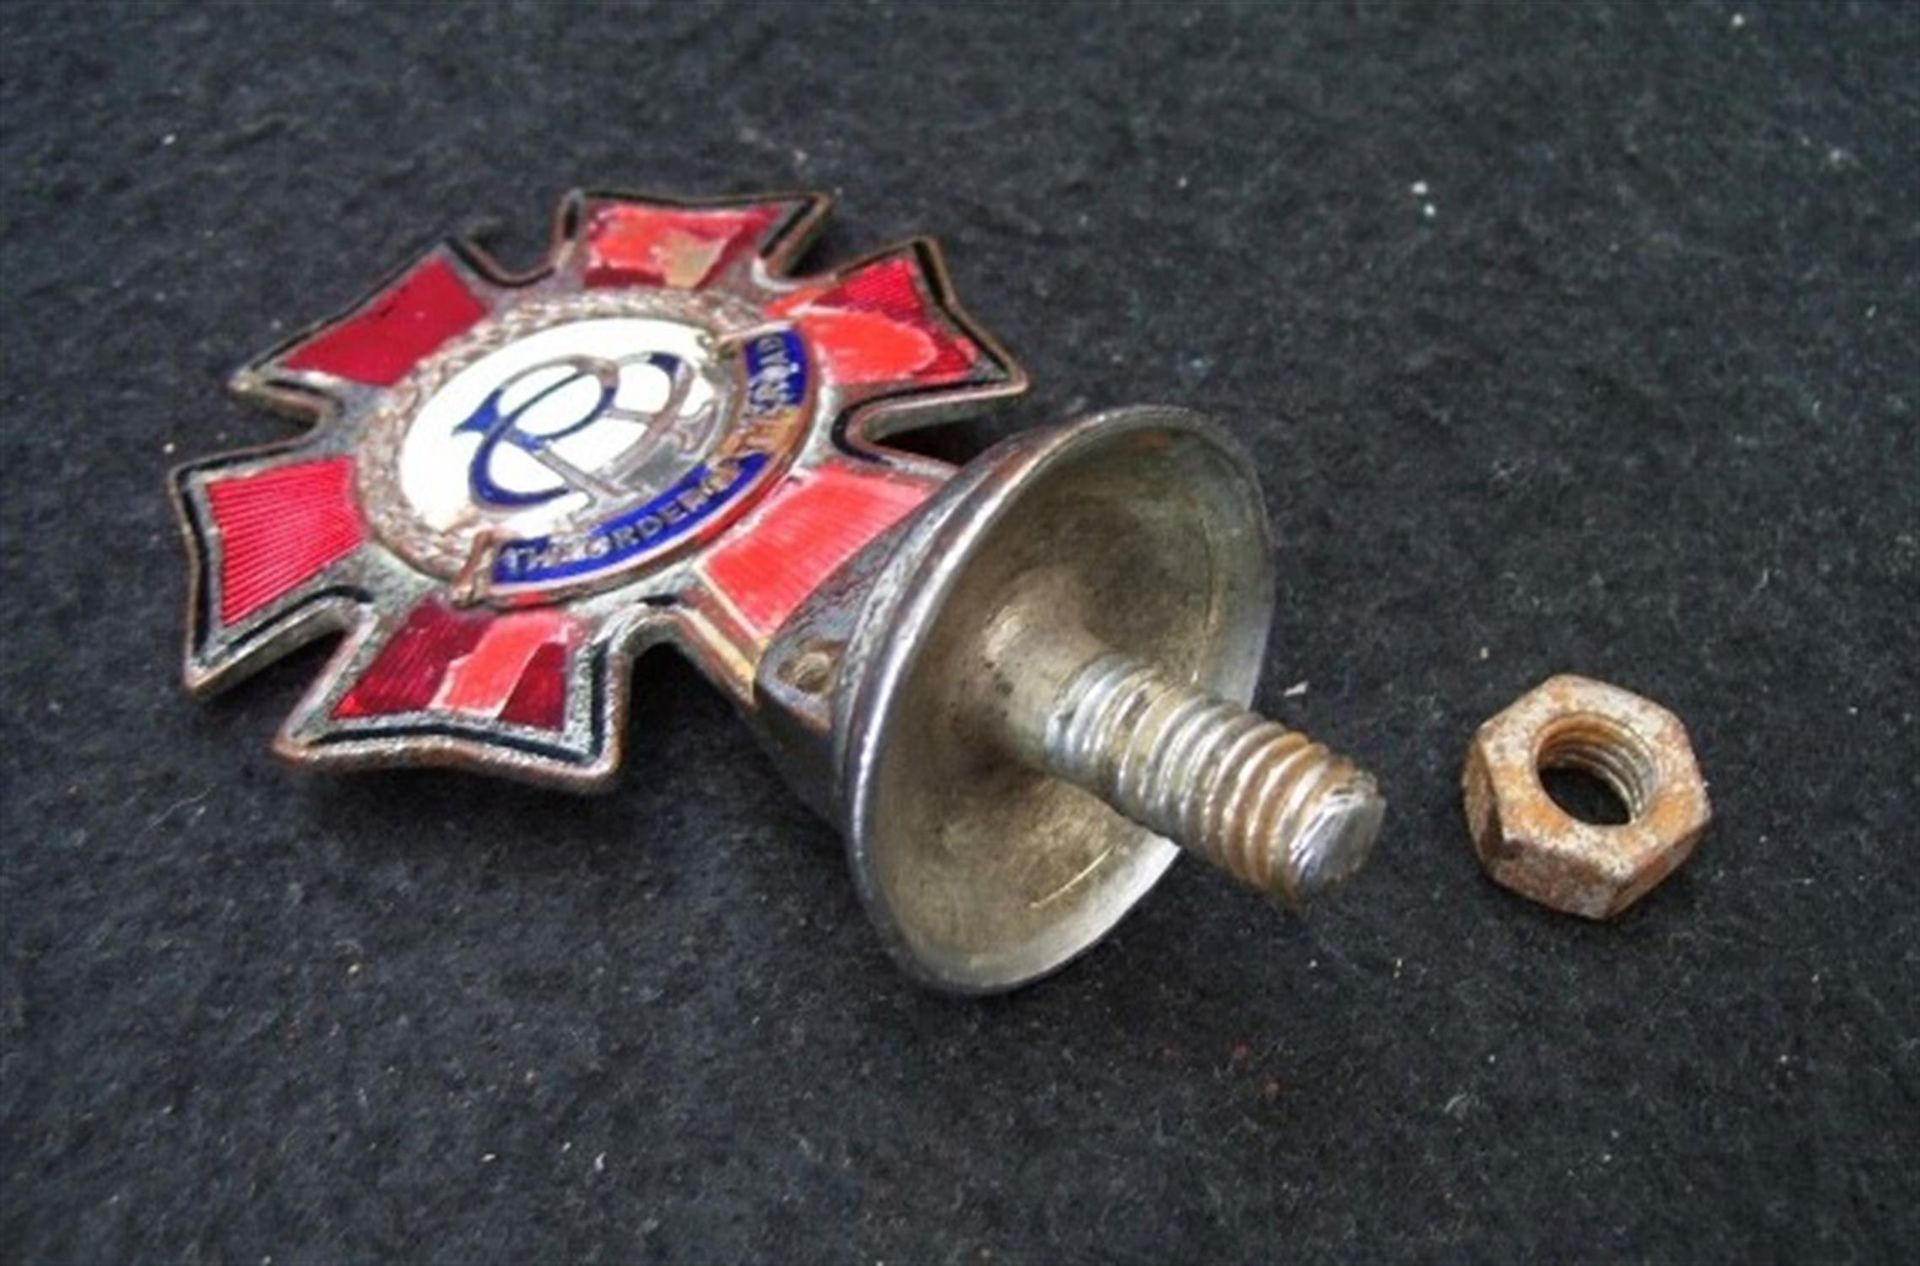 A Very Rare Enamelled "Order of the Road" Radiator Grille Mascot Car Badge - Image 3 of 4